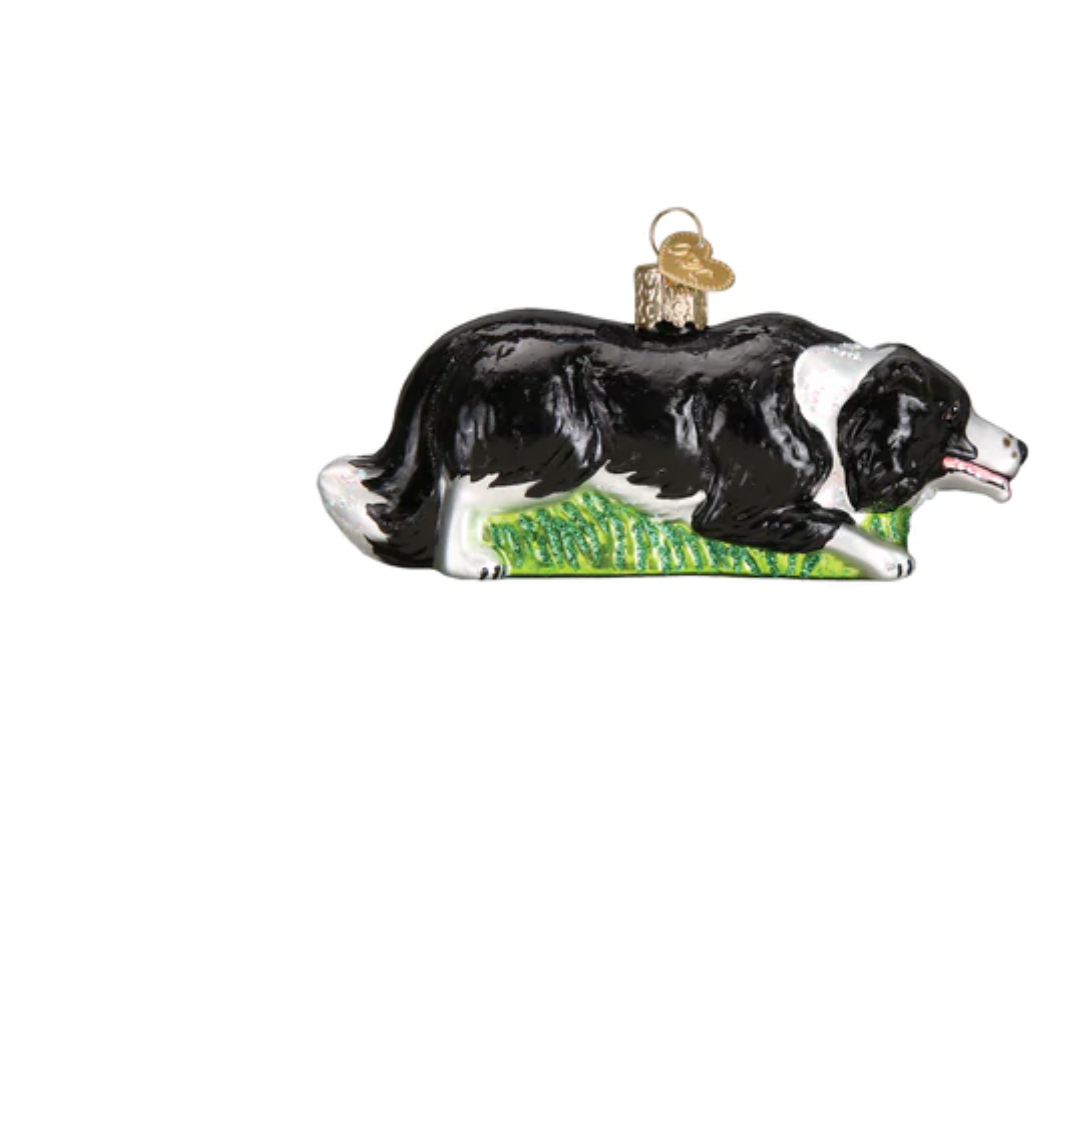 Old World Christmas Herding Border Collie Glass Christmas Ornament New with Box